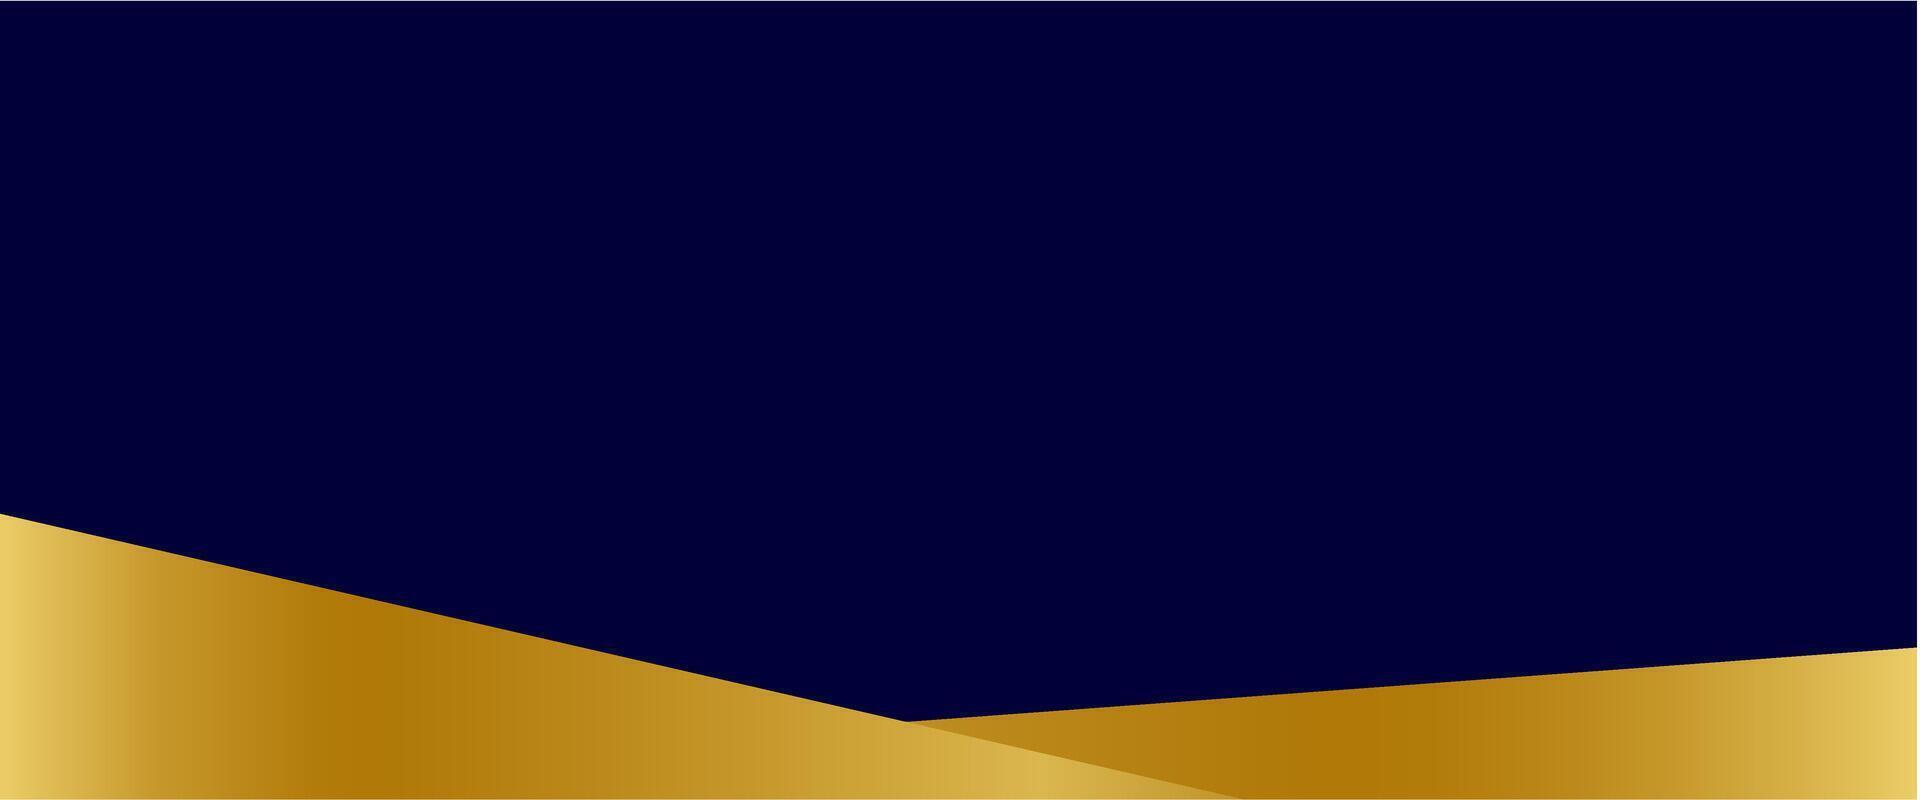 Abstract elegant dark blue background with golden shape vector